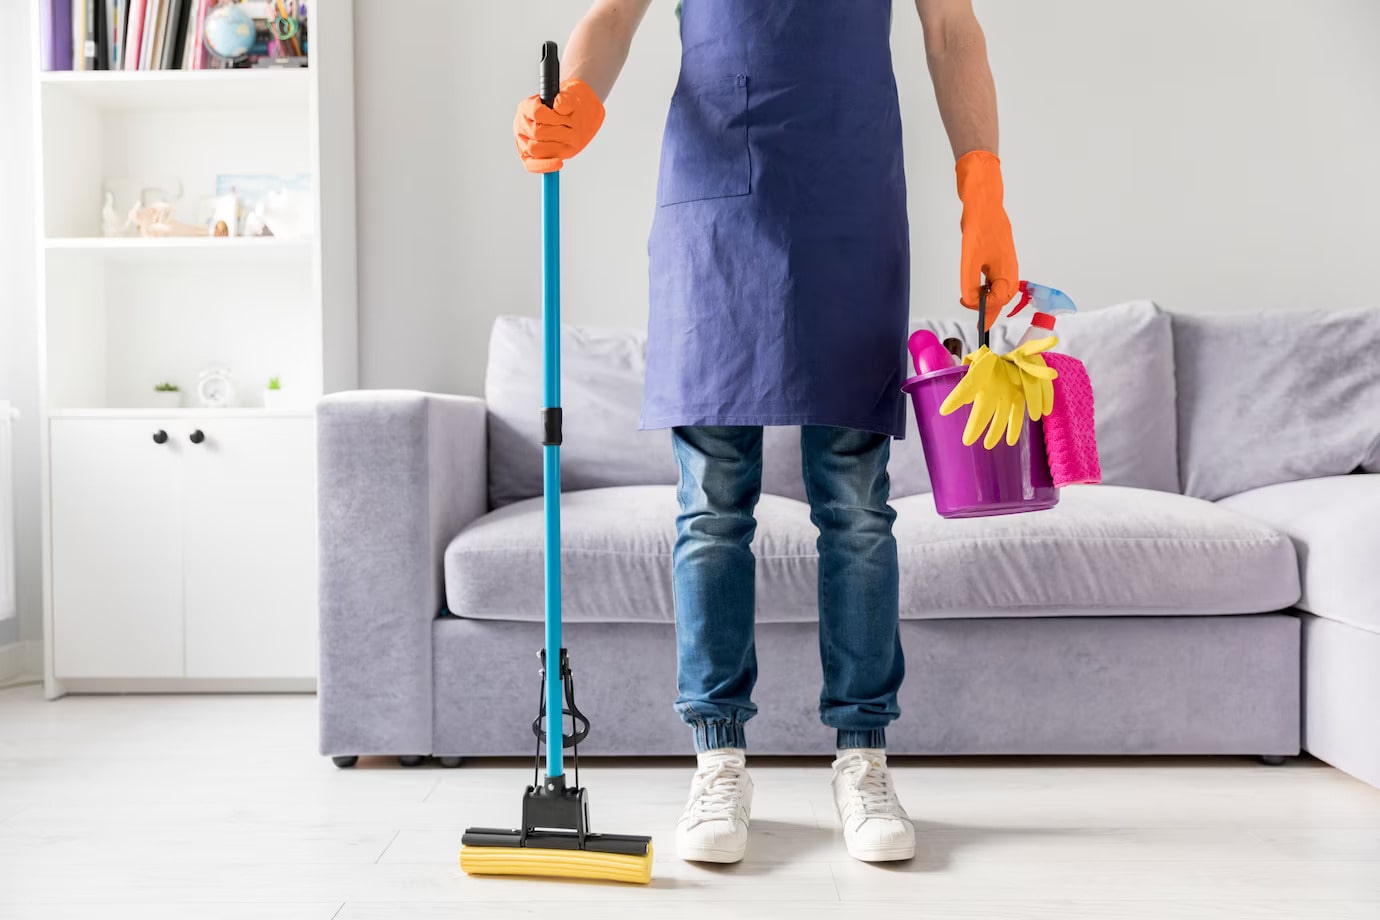 Man cleaning his home